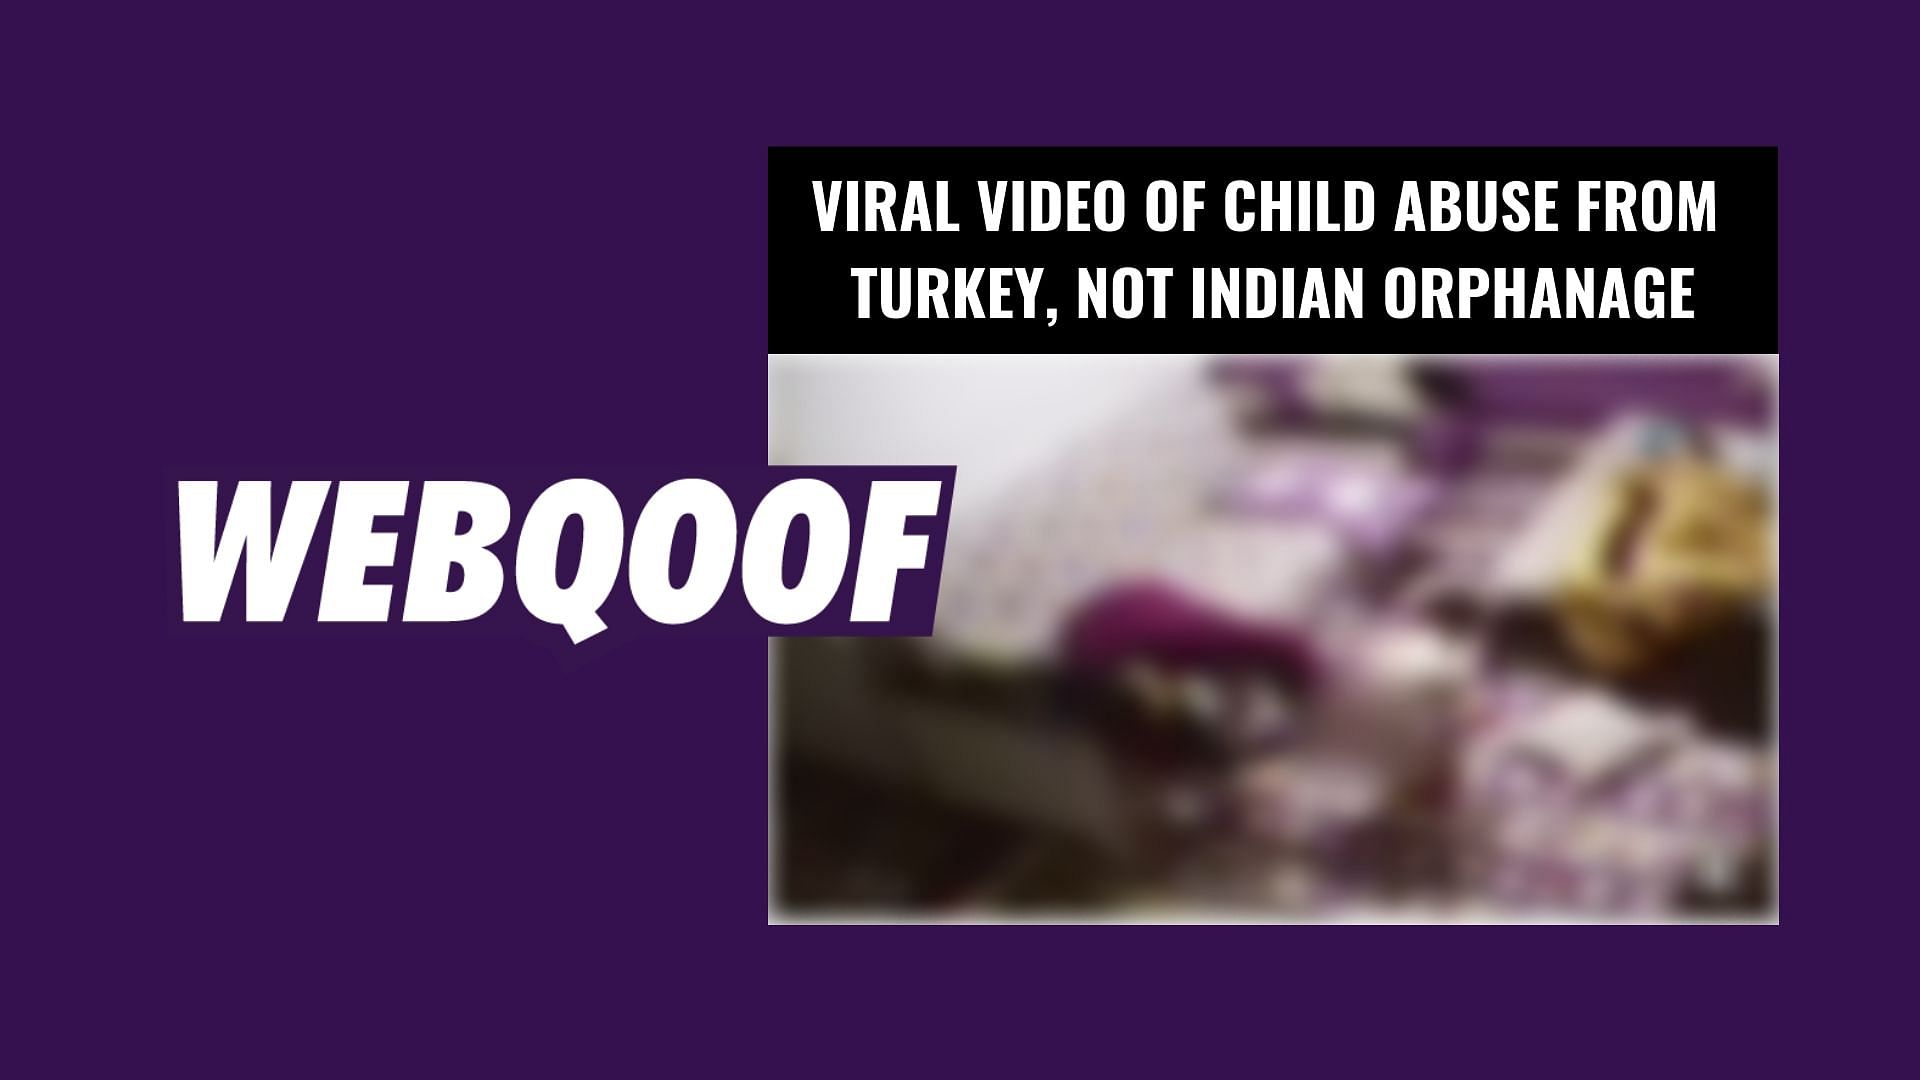 The video has been shared widely on social media in an effort to “recognise and punish” the woman.